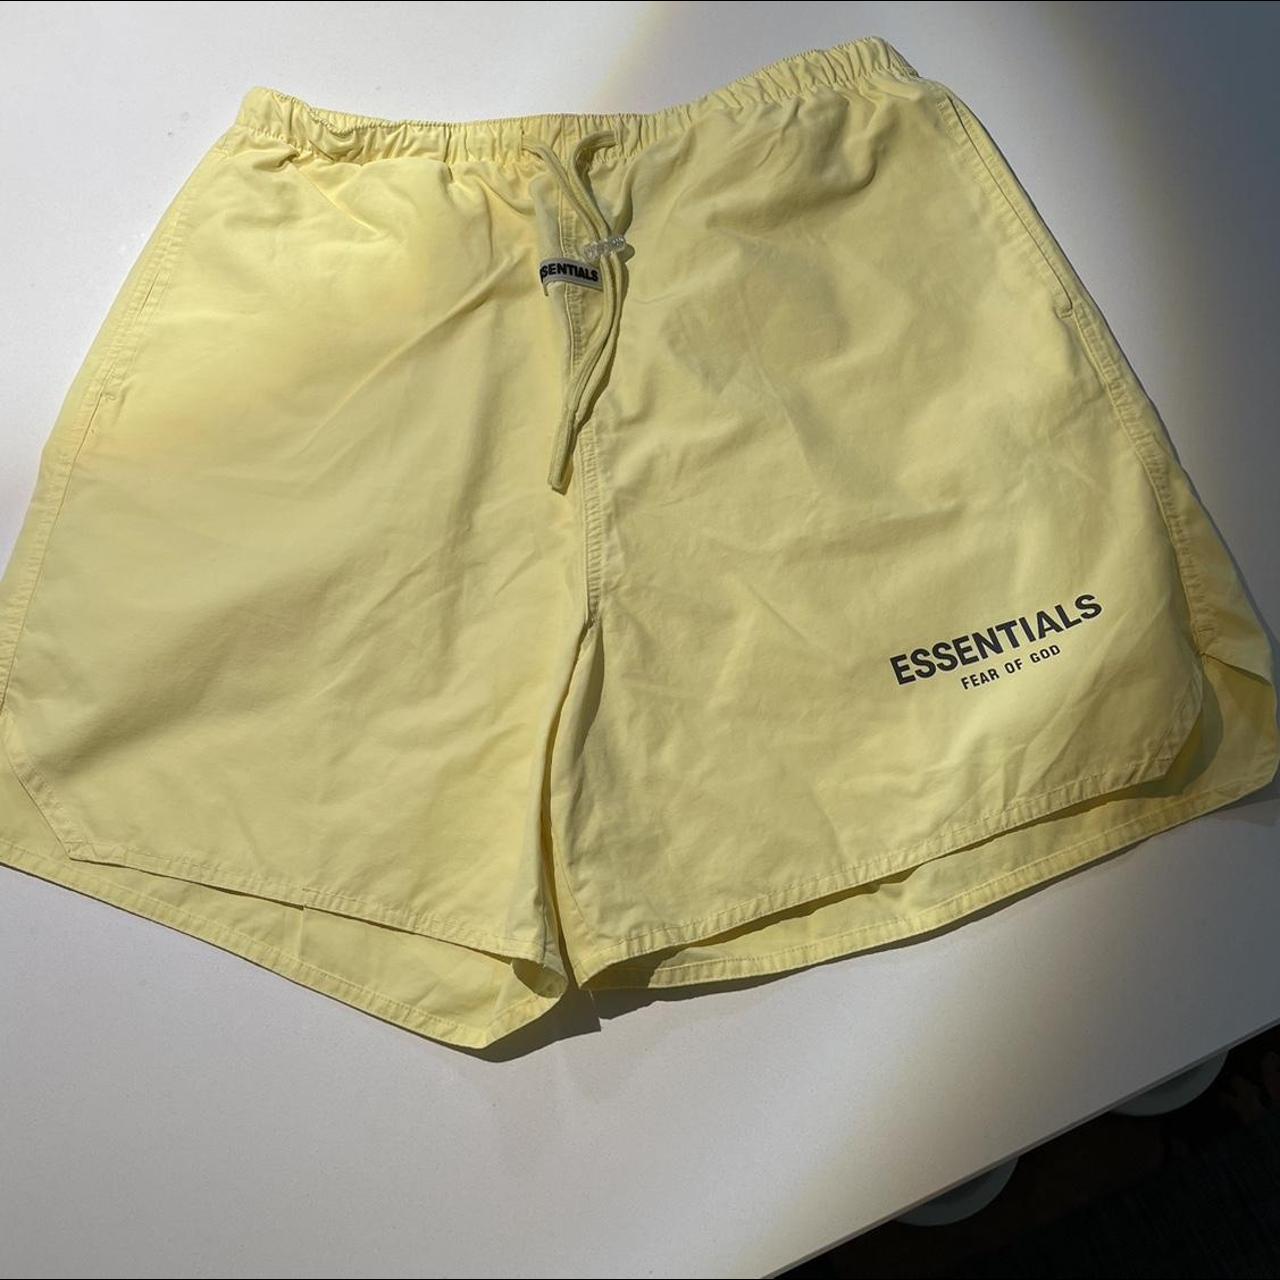 Fear of God Essentials yellow shorts. Bought from...